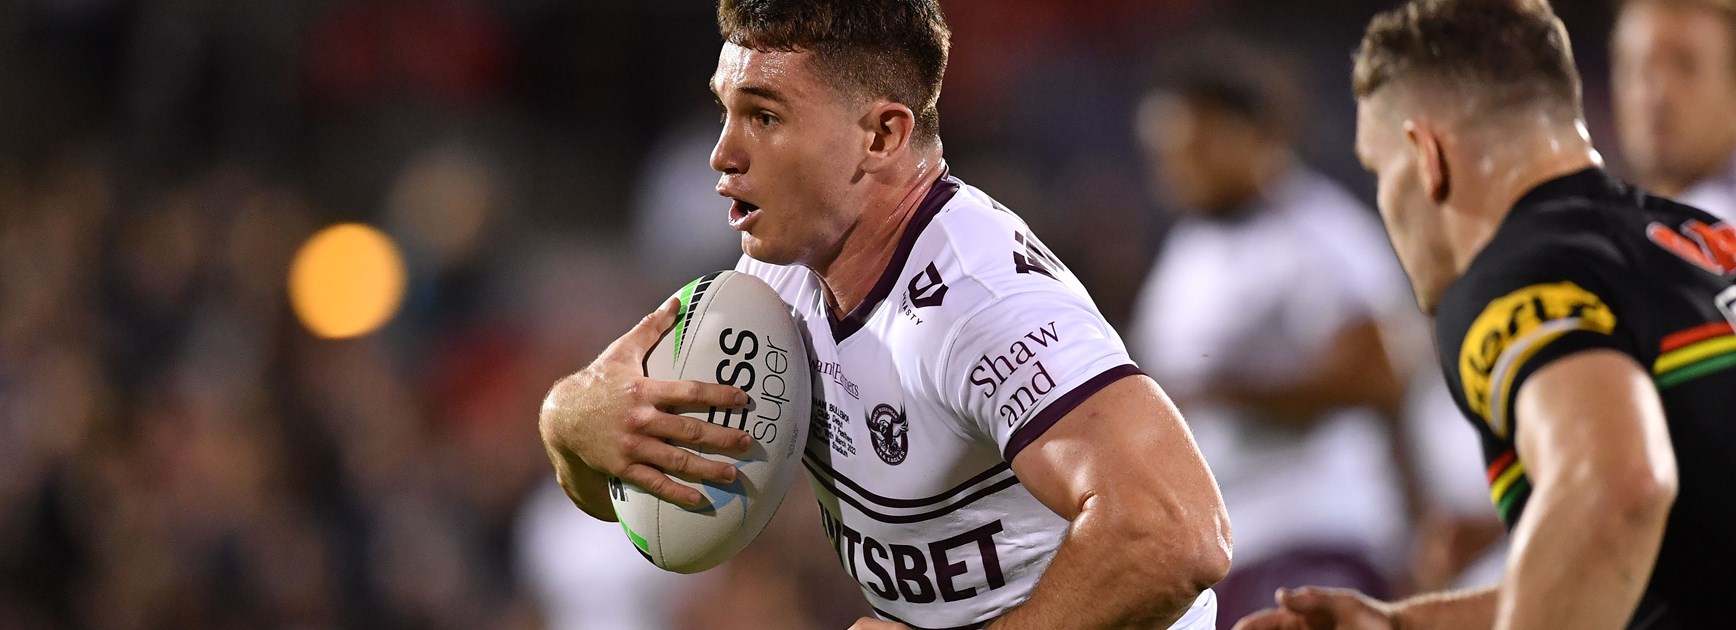 Ethan Bullemor scored a try in his Club debut for Manly tonight